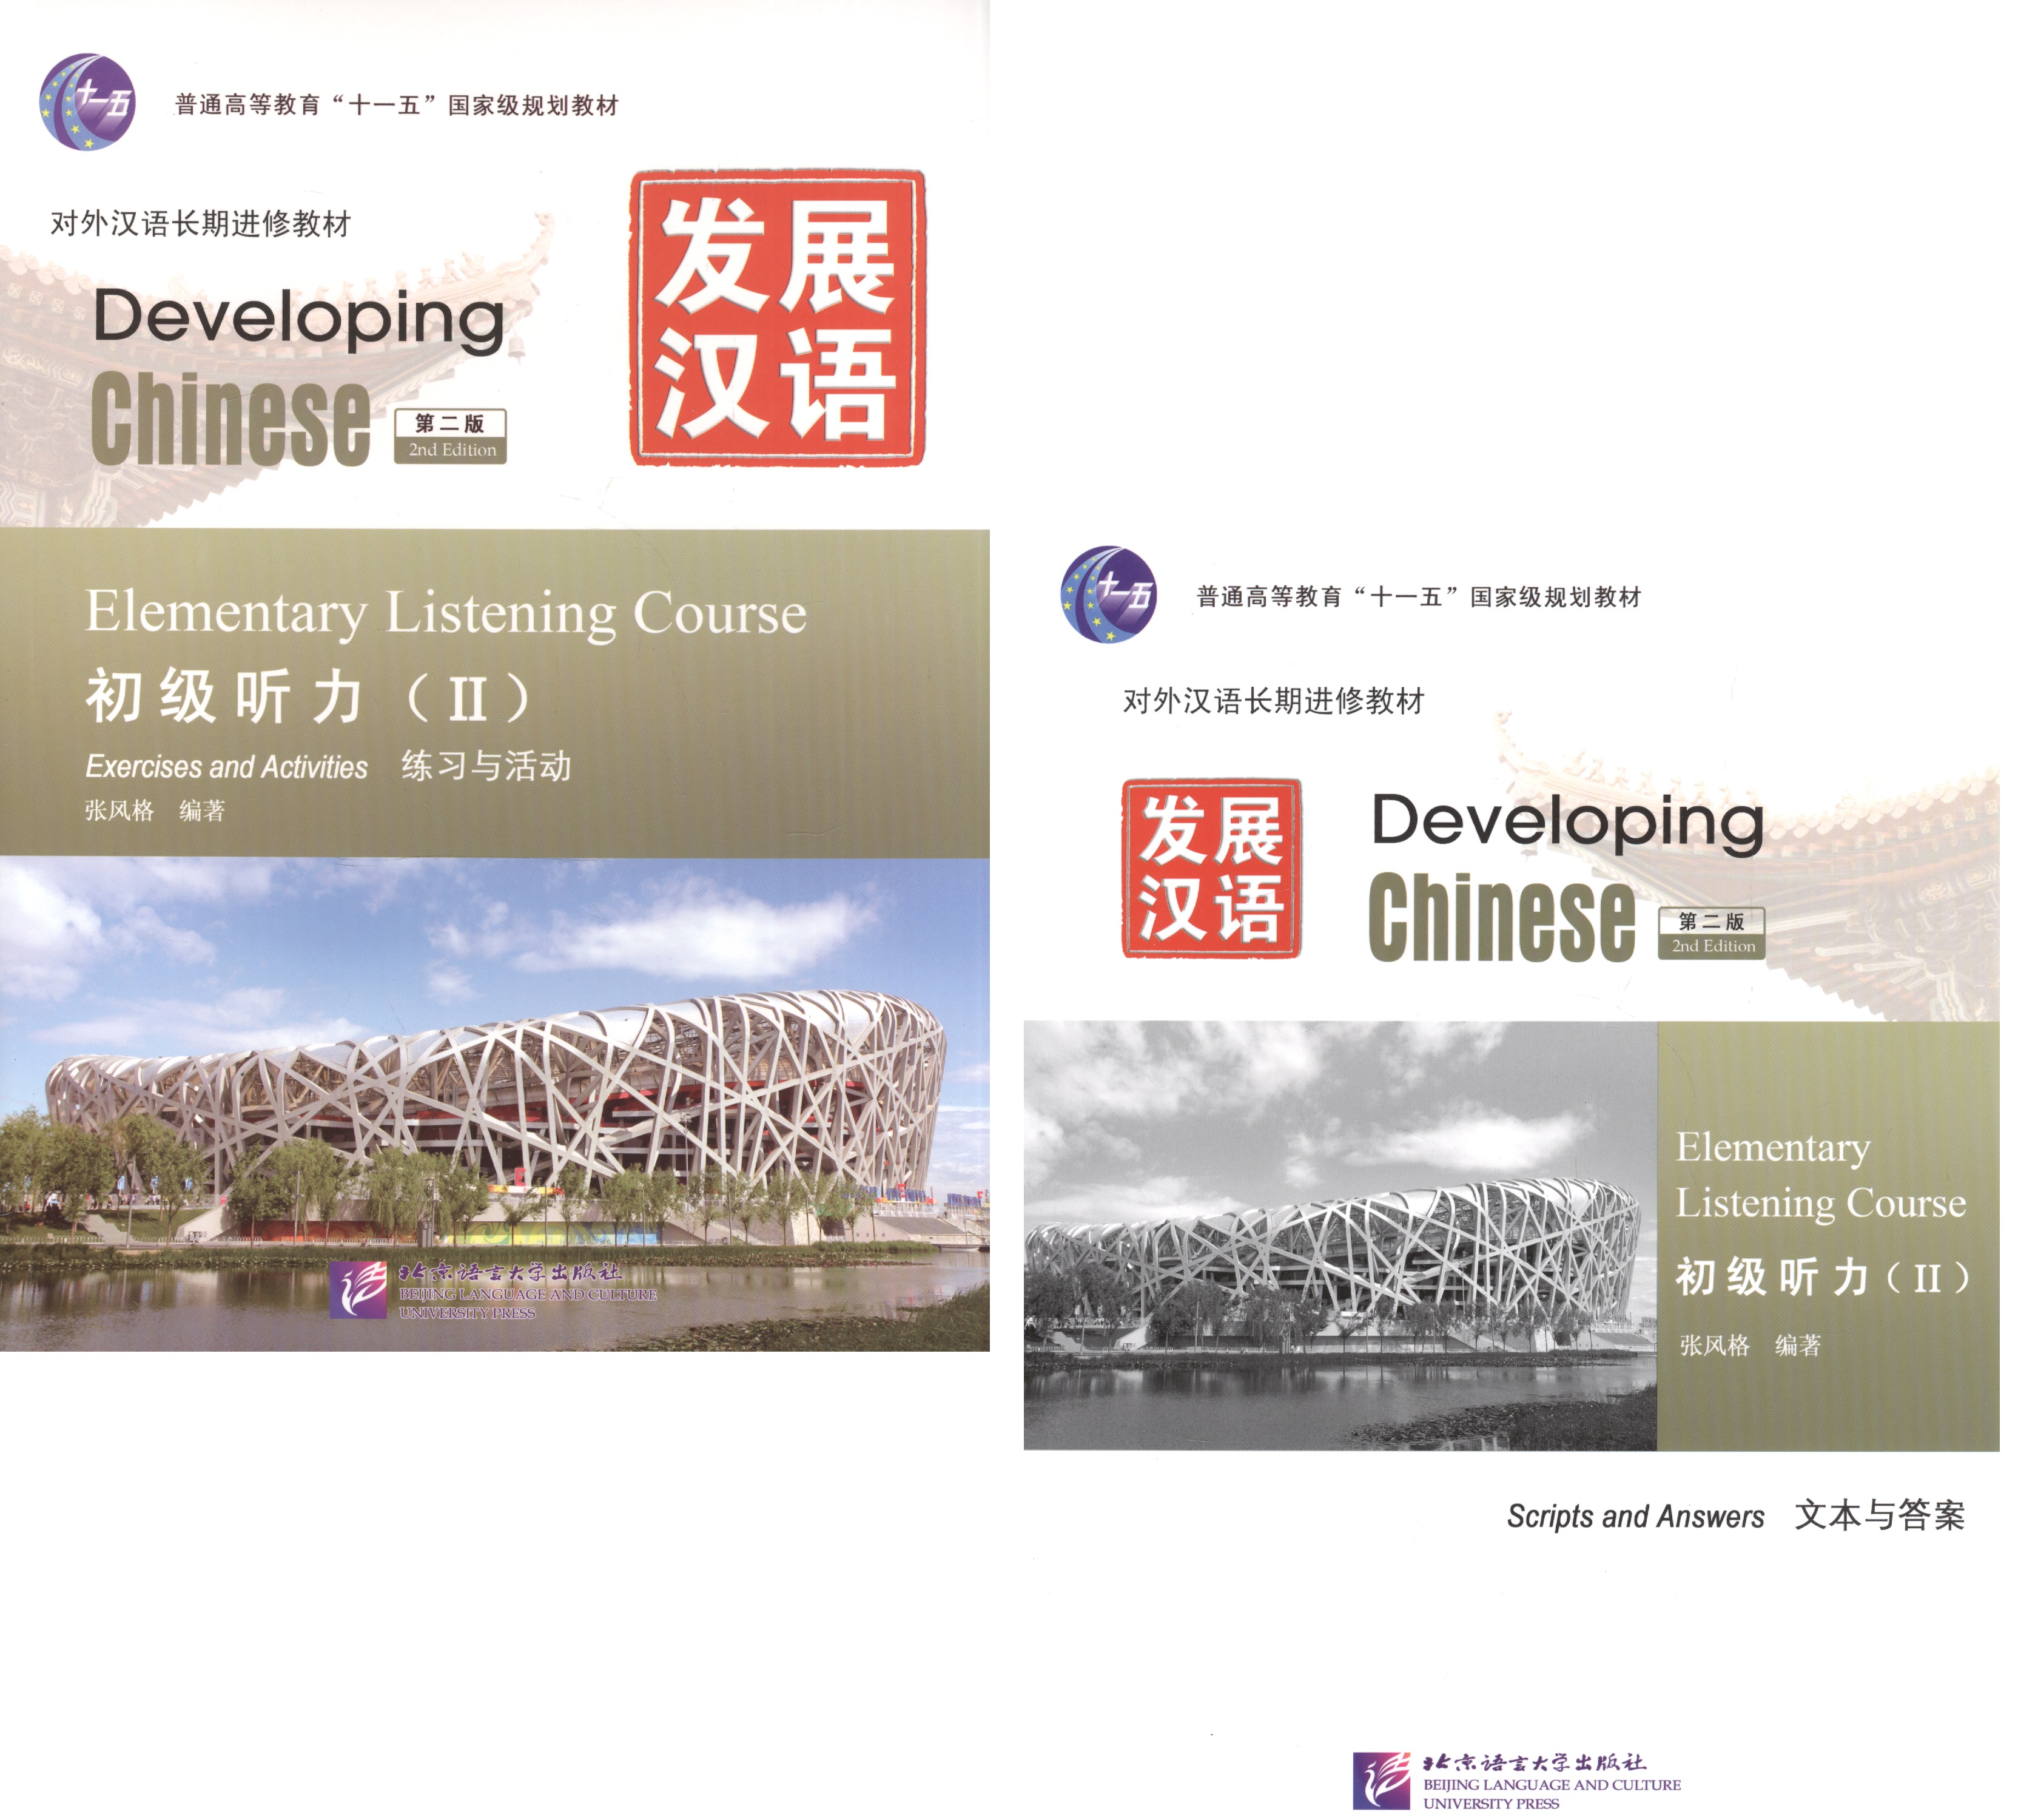 Developing Chinese Elementary 2 Listening Course Разв. кит. Нач. ур. Ч.2 Курс аудир. (+MP3) (2 изд) american language a total of 6 volumes of american original classic textbooks in english and chinese bilingual translations